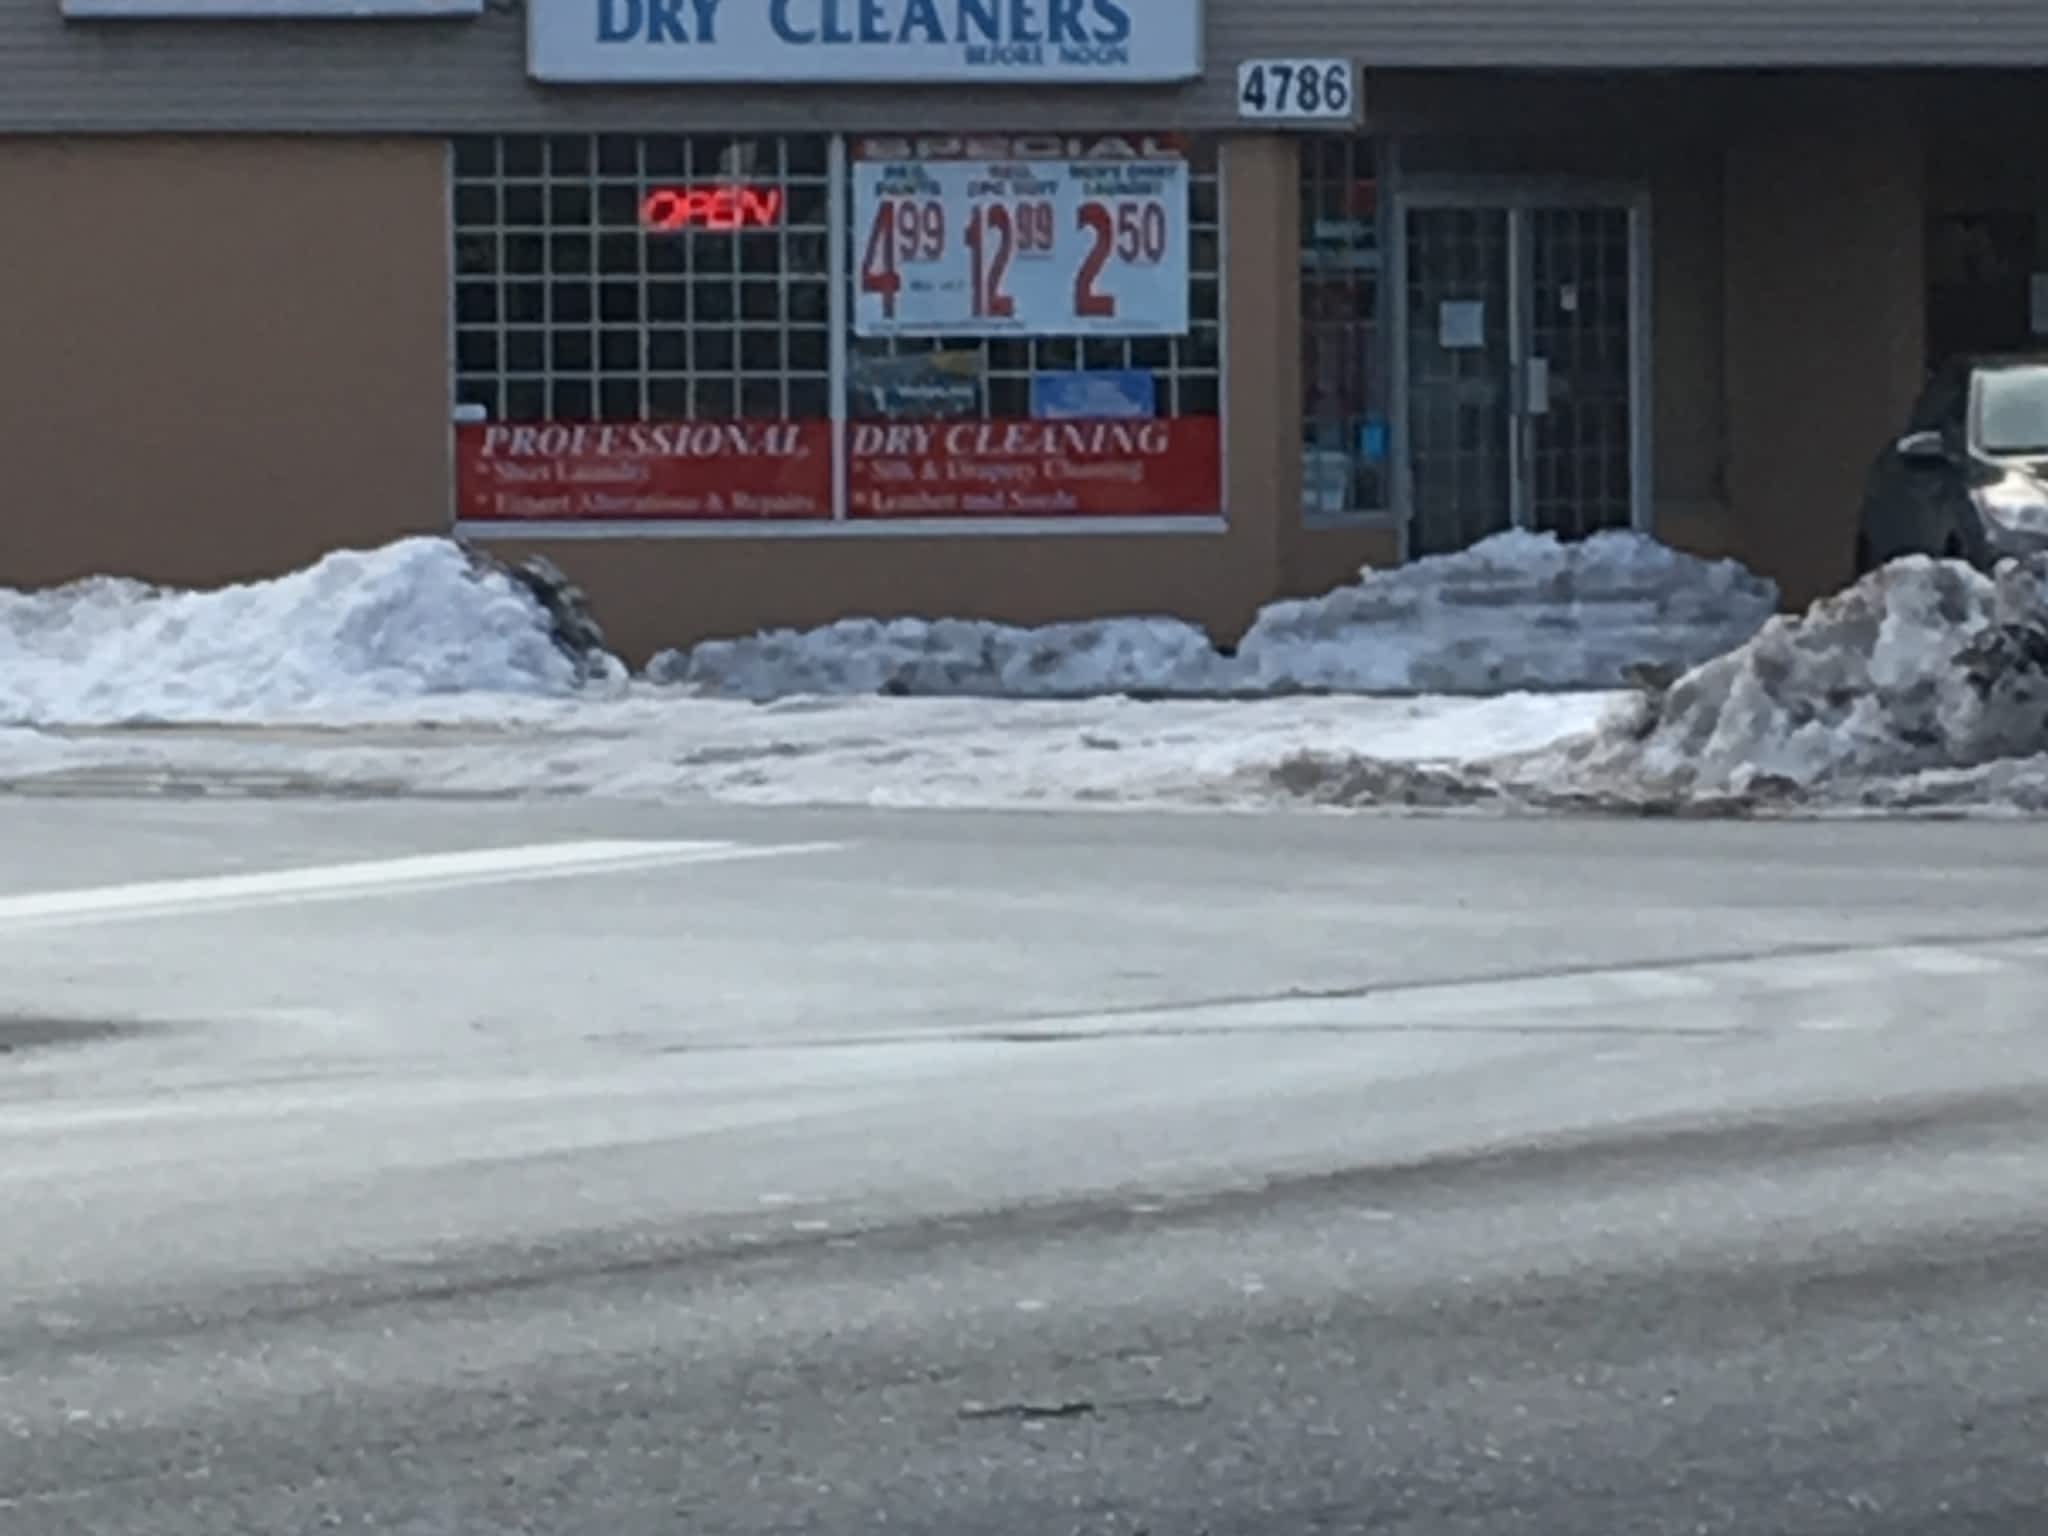 photo Marv's Drycleaners